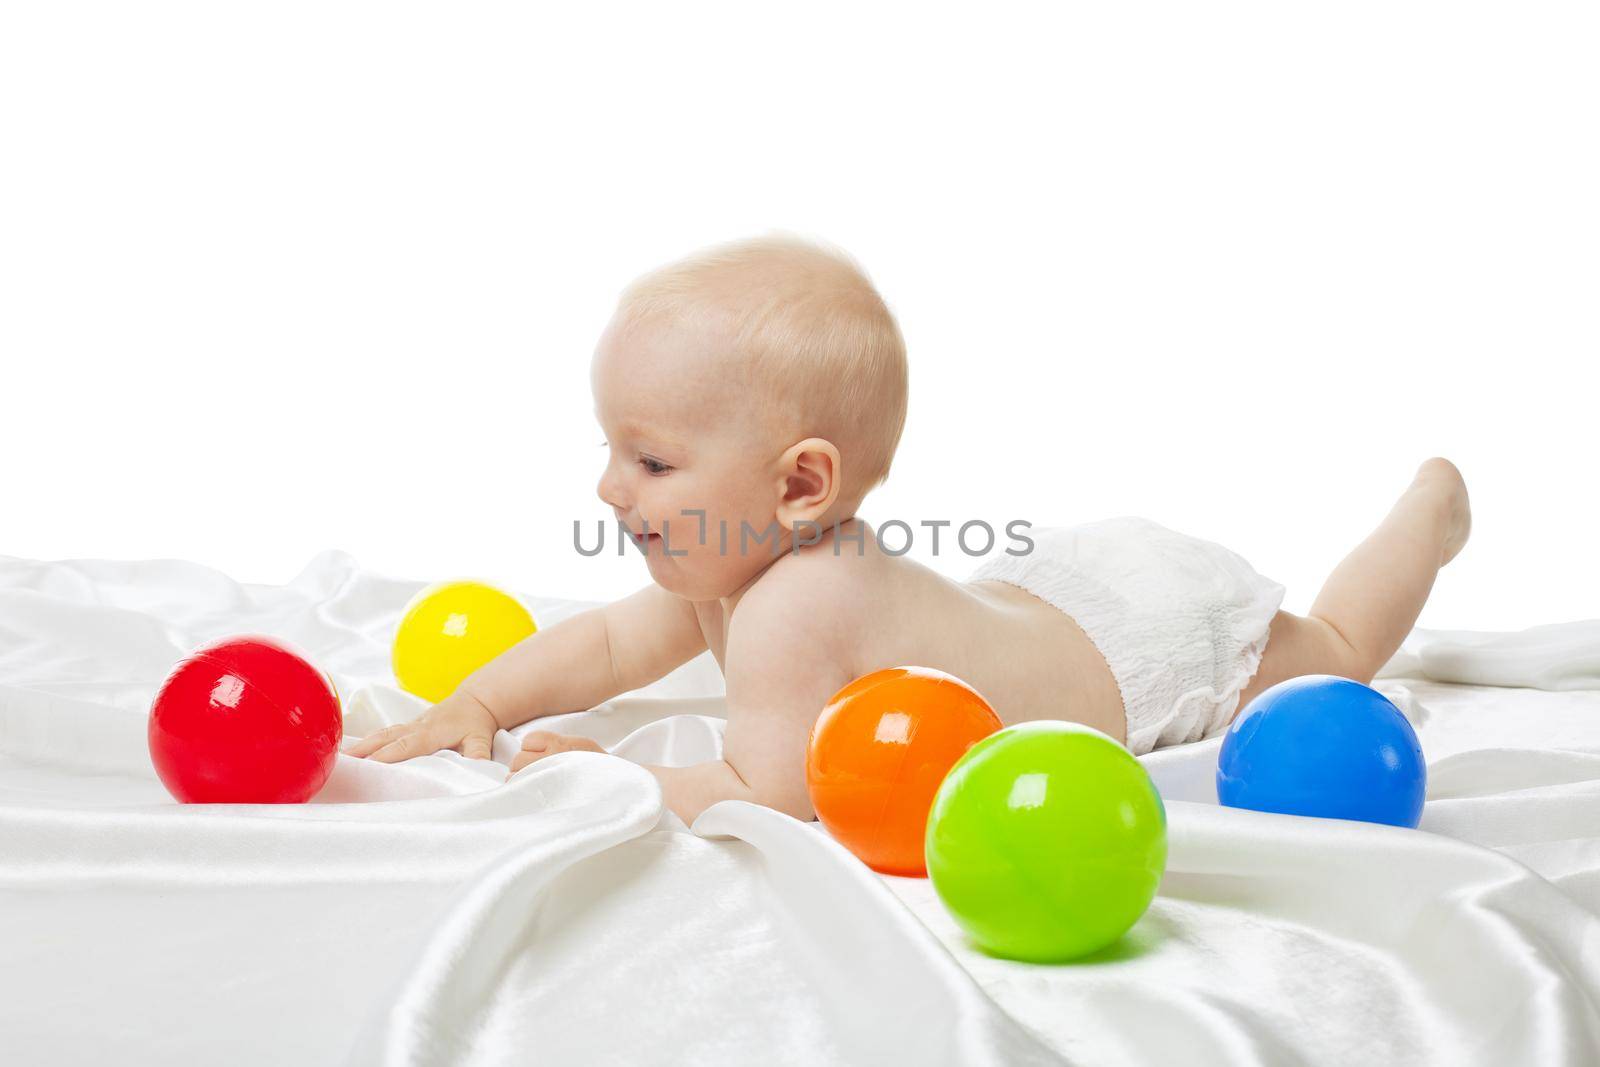 Cute baby play in bed with color balls by rivertime